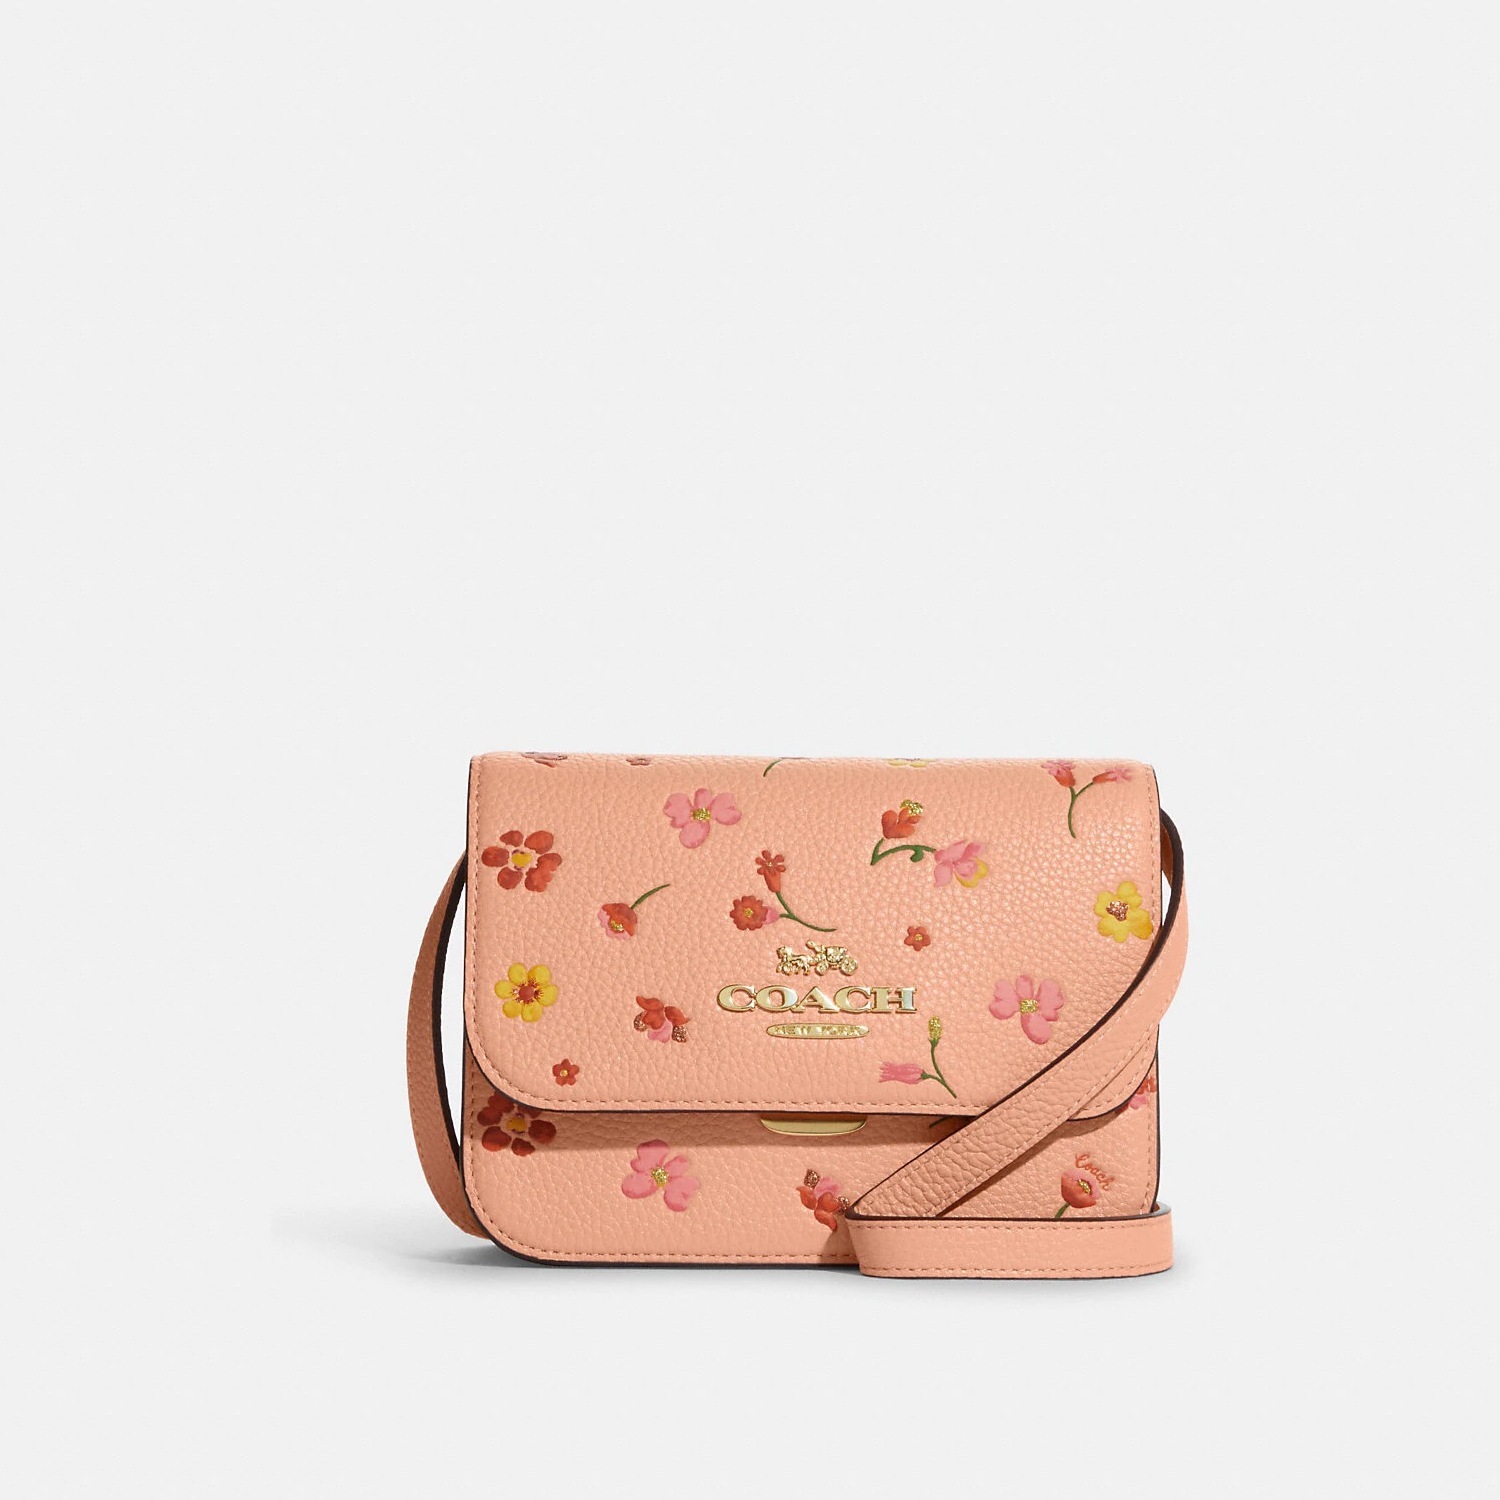 Coach 1941 Floral Bag on SALE - Shopping and Info